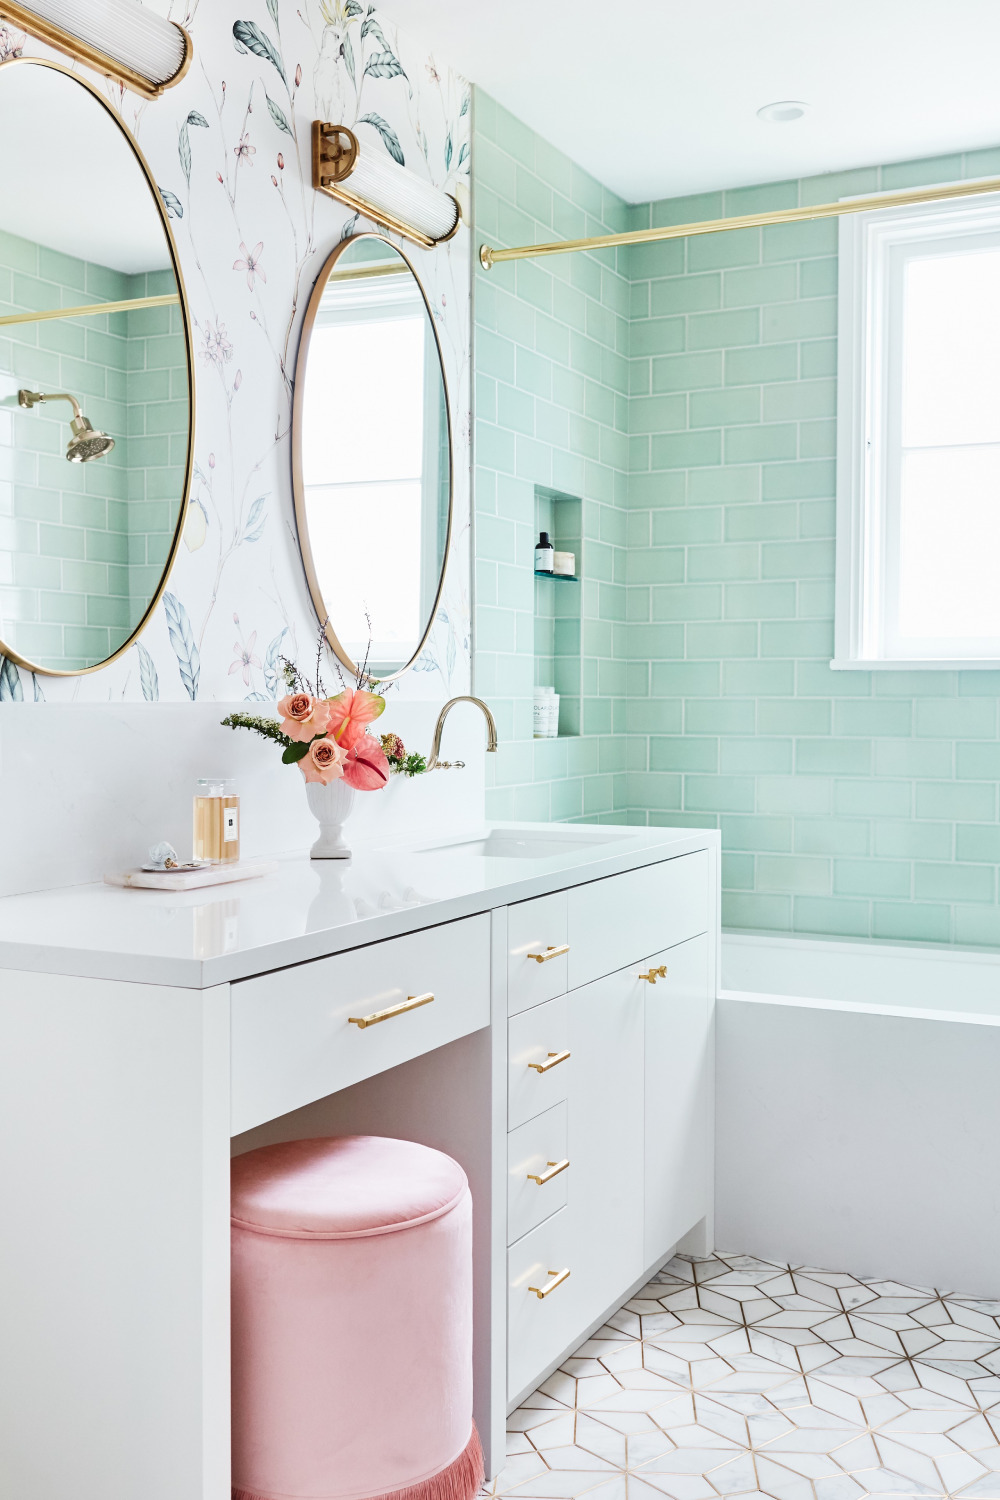 1-30-4 Colors That Go With Mint Green in a Home Decor